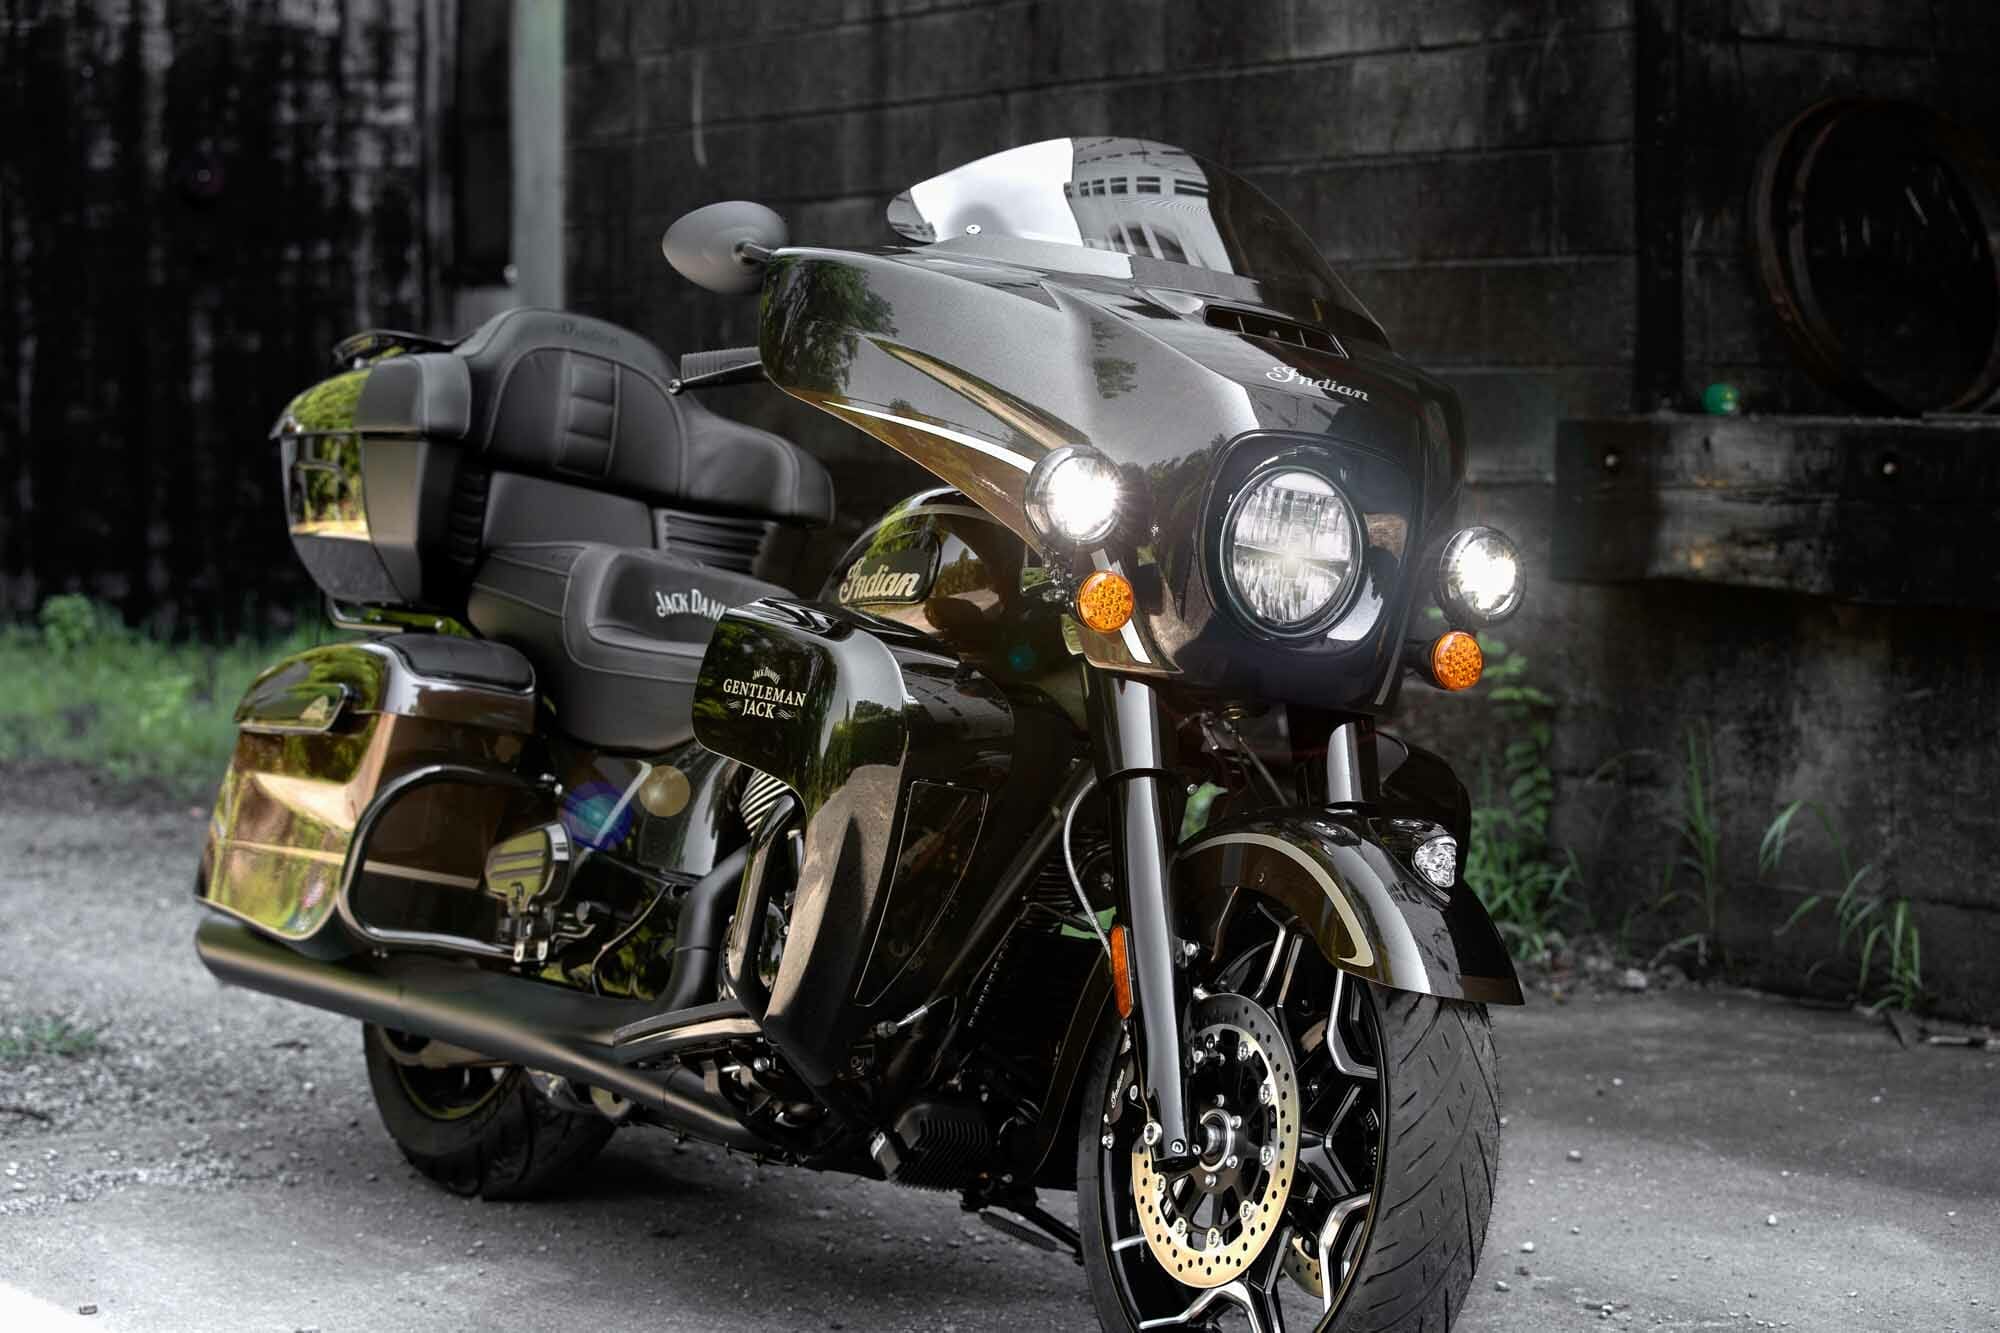 Indian Motorcycle - 5th Jack Daniels Limited Edition
- also in the App MOTORCYCLE NEWS